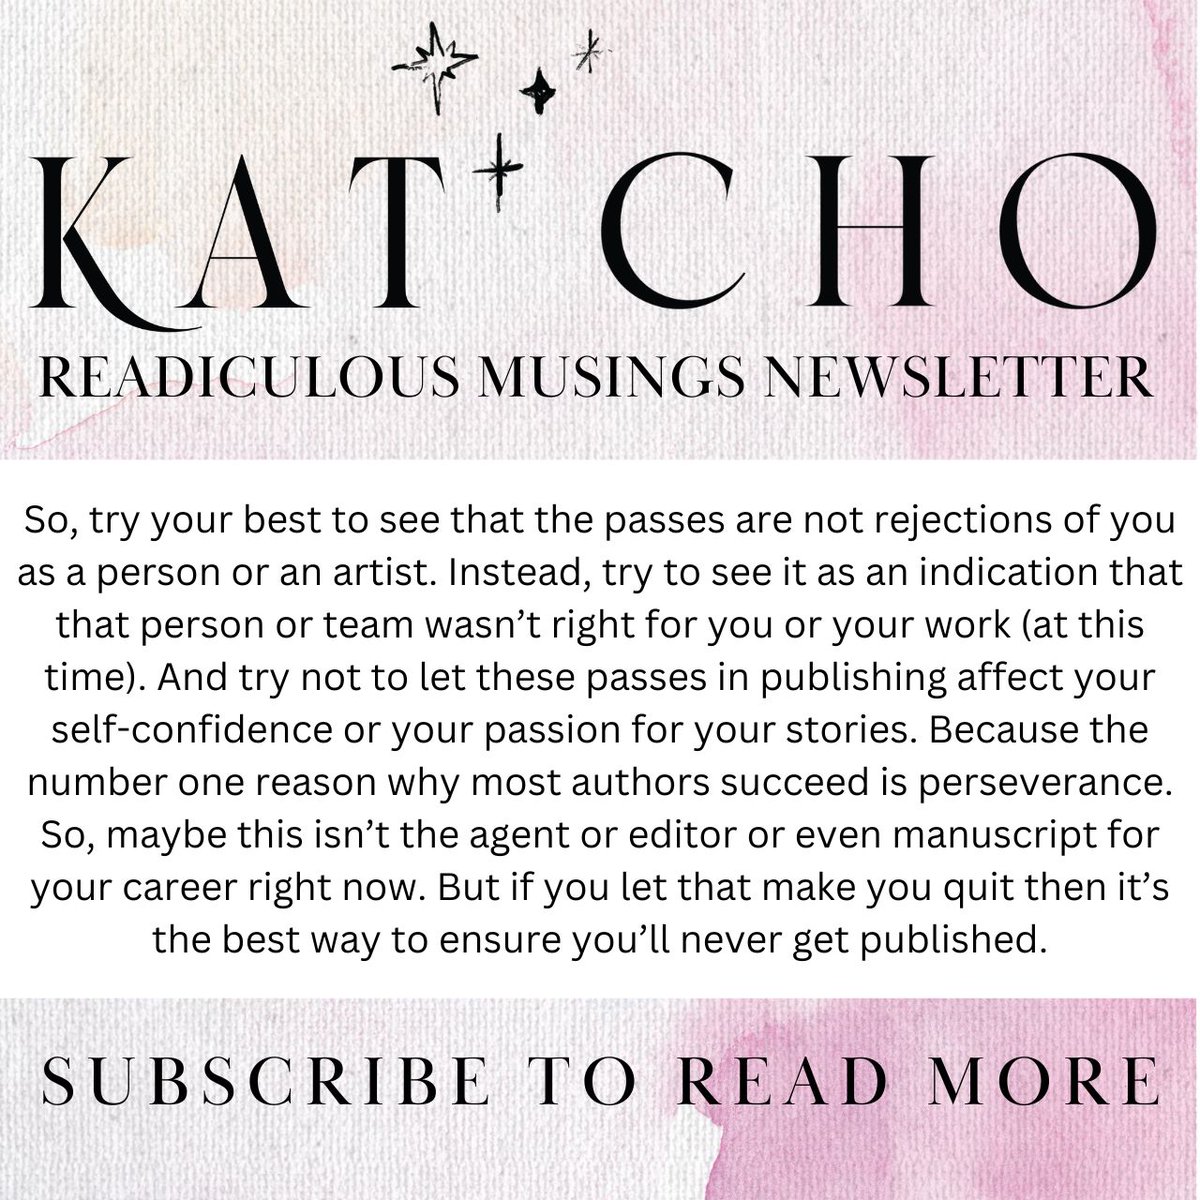 In today's Readiculous Musings Newsletter I answer a follower question about how to handle rejection in publishing!

Subscribe to read more: katchowrites.us12.list-manage.com/subscribe?u=c4…

#newsletter #authorlife #writingadvice #writerlife